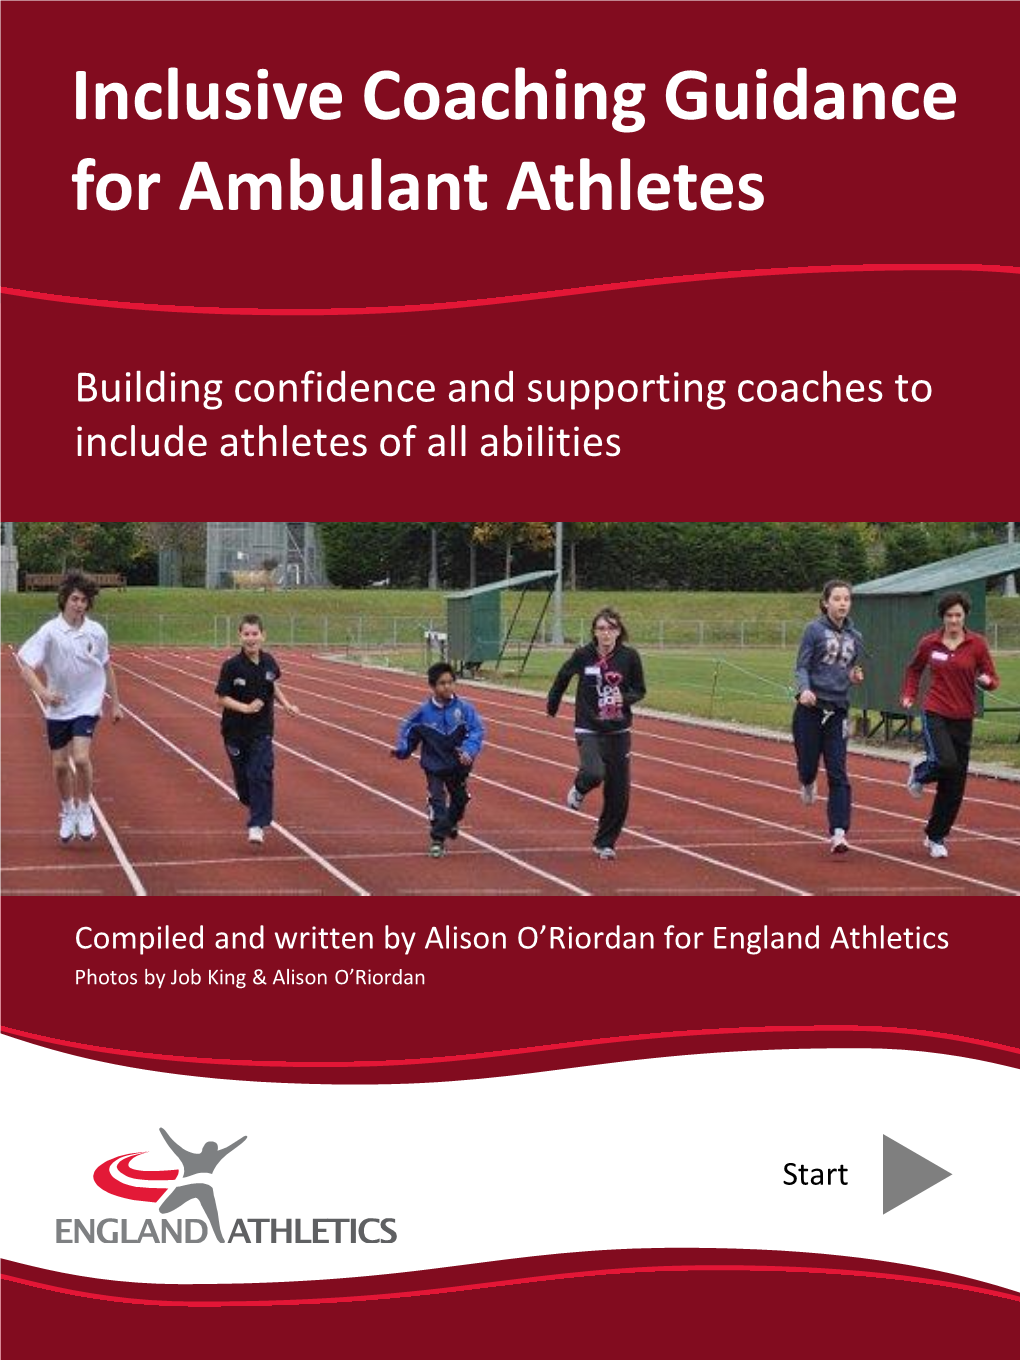 Inclusive Coaching Guidance for Ambulant Athletes